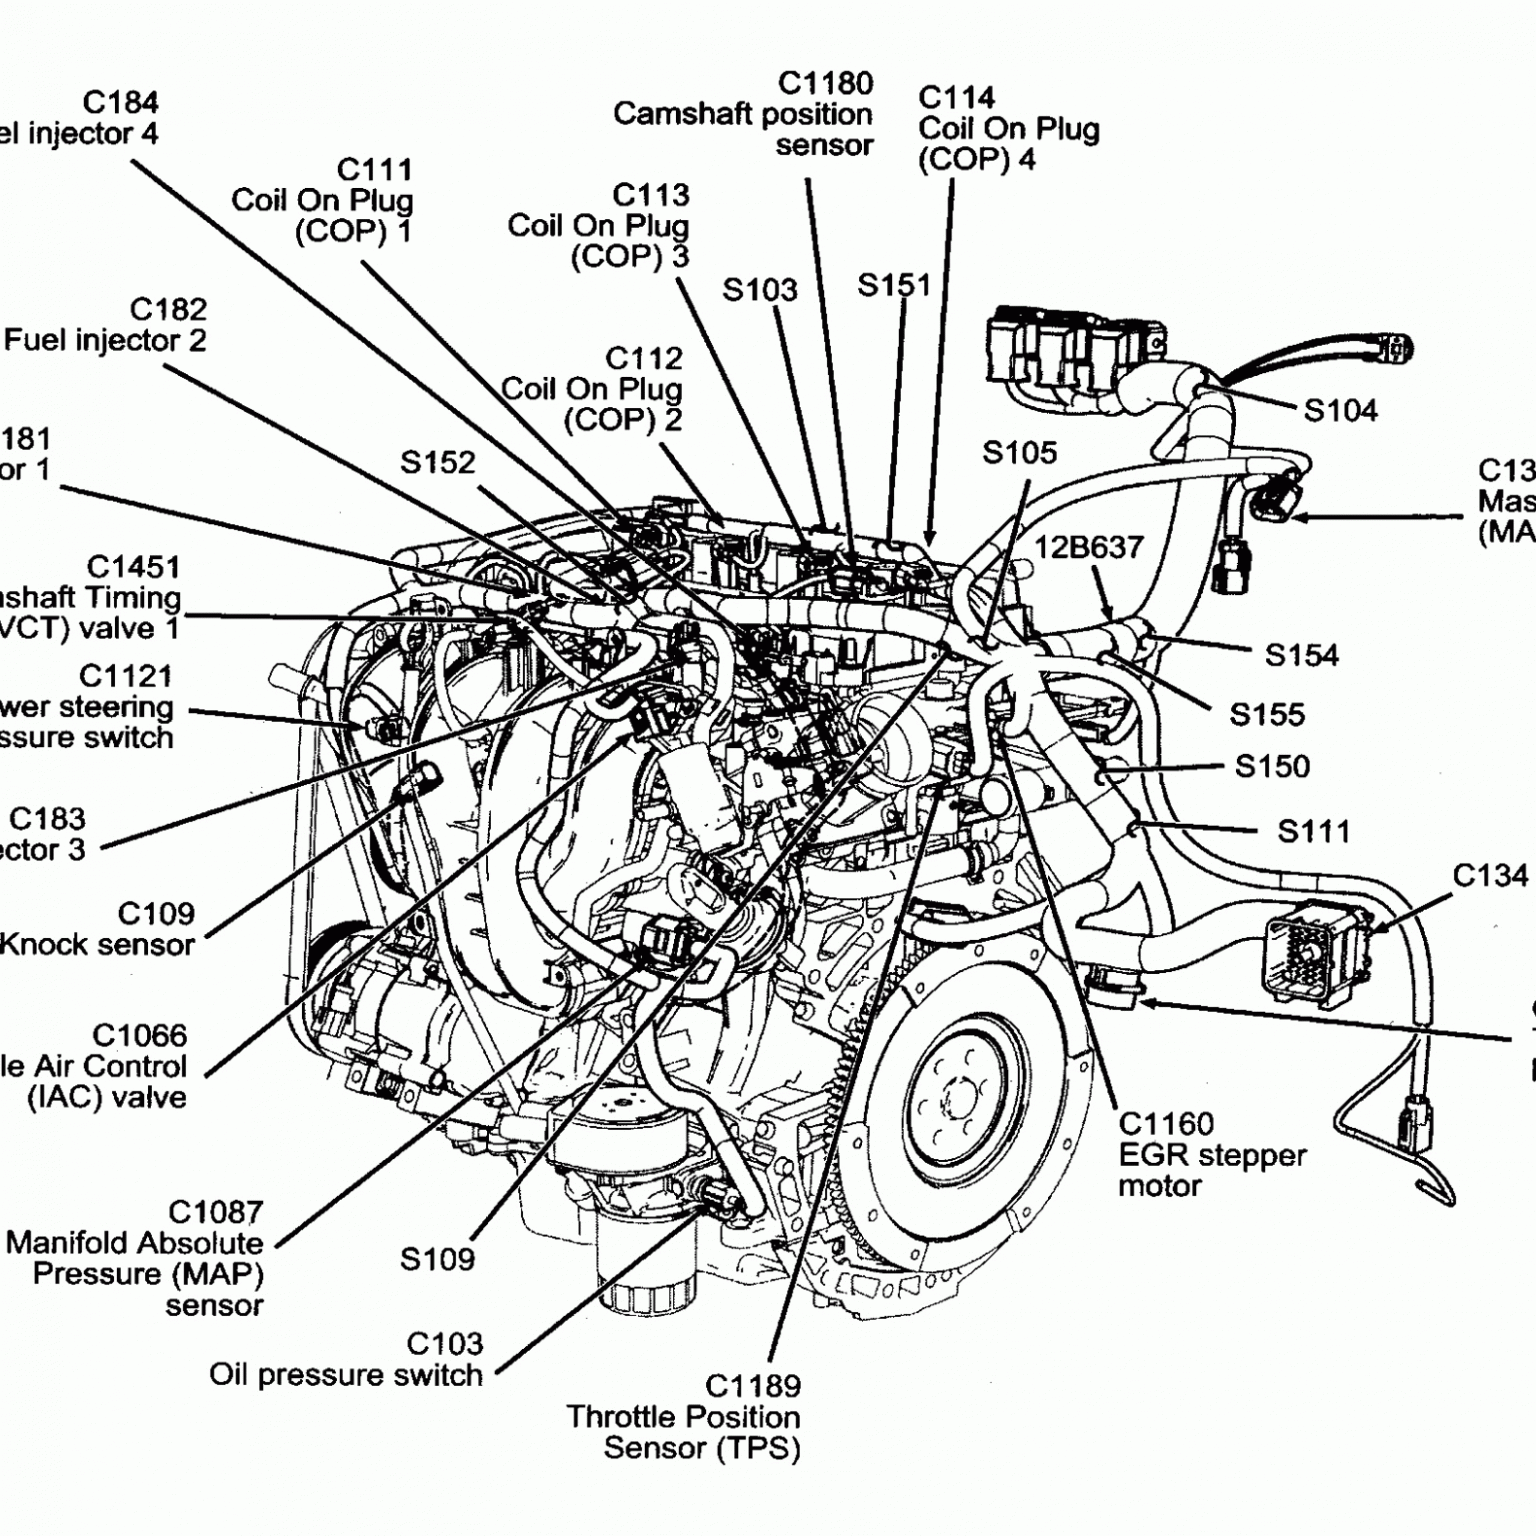 Ignition Coil Replacement - Ford Escape 3.0L | Wiring and Printable